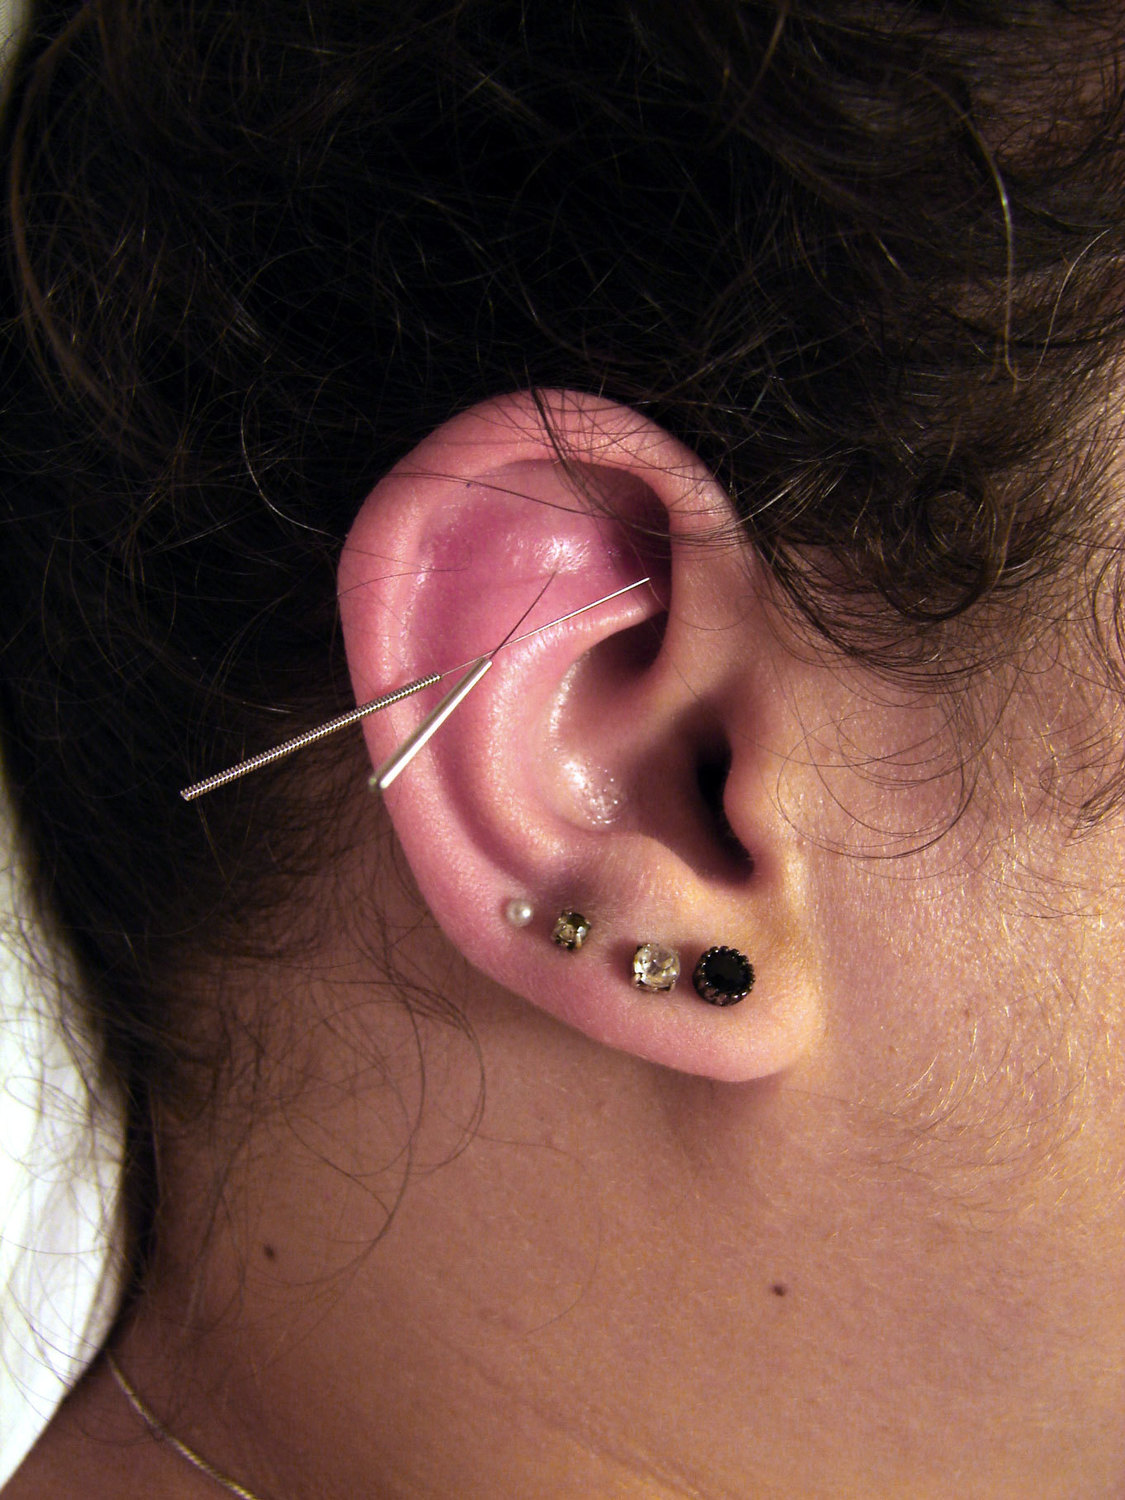 Gallery Photo of auricular acupuncture